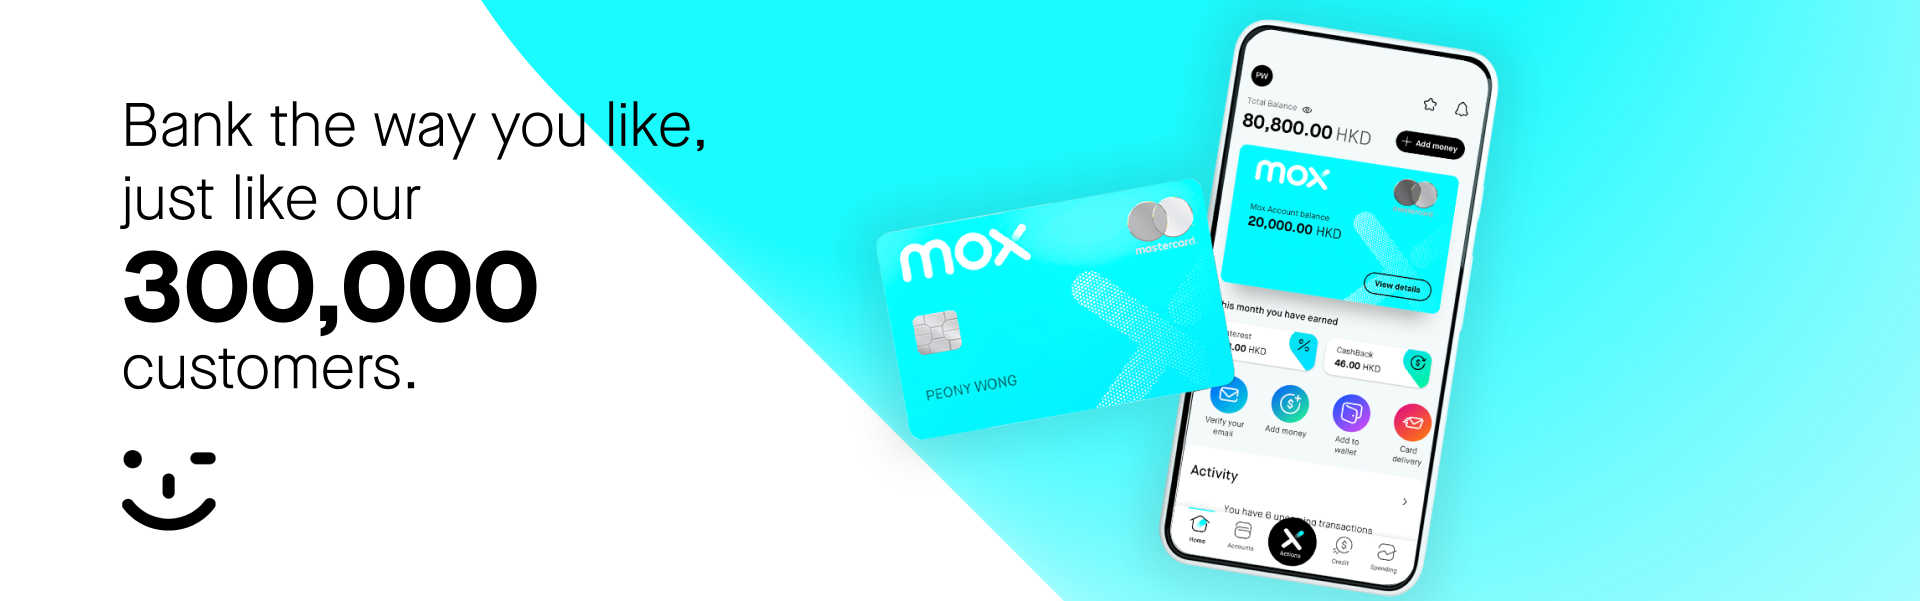 Our Mox customer family is now 300,000 strong